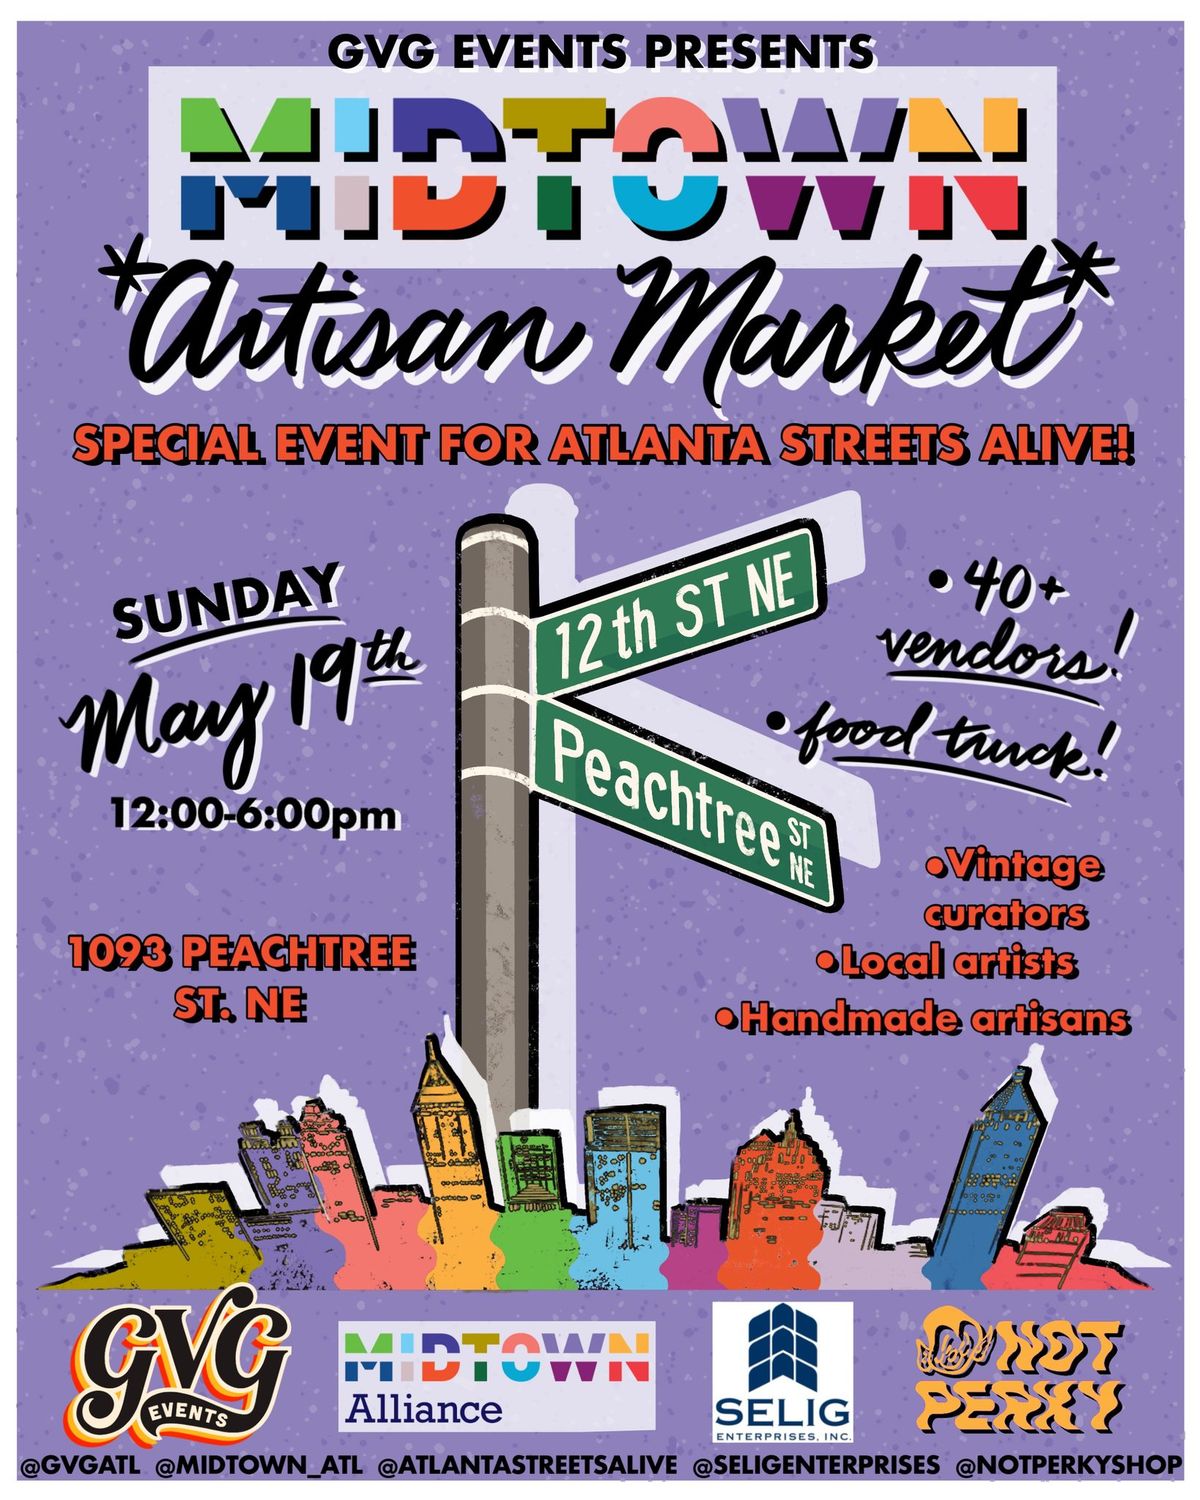 Midtown Artisan Market by GVG Events and Midtown Alliance